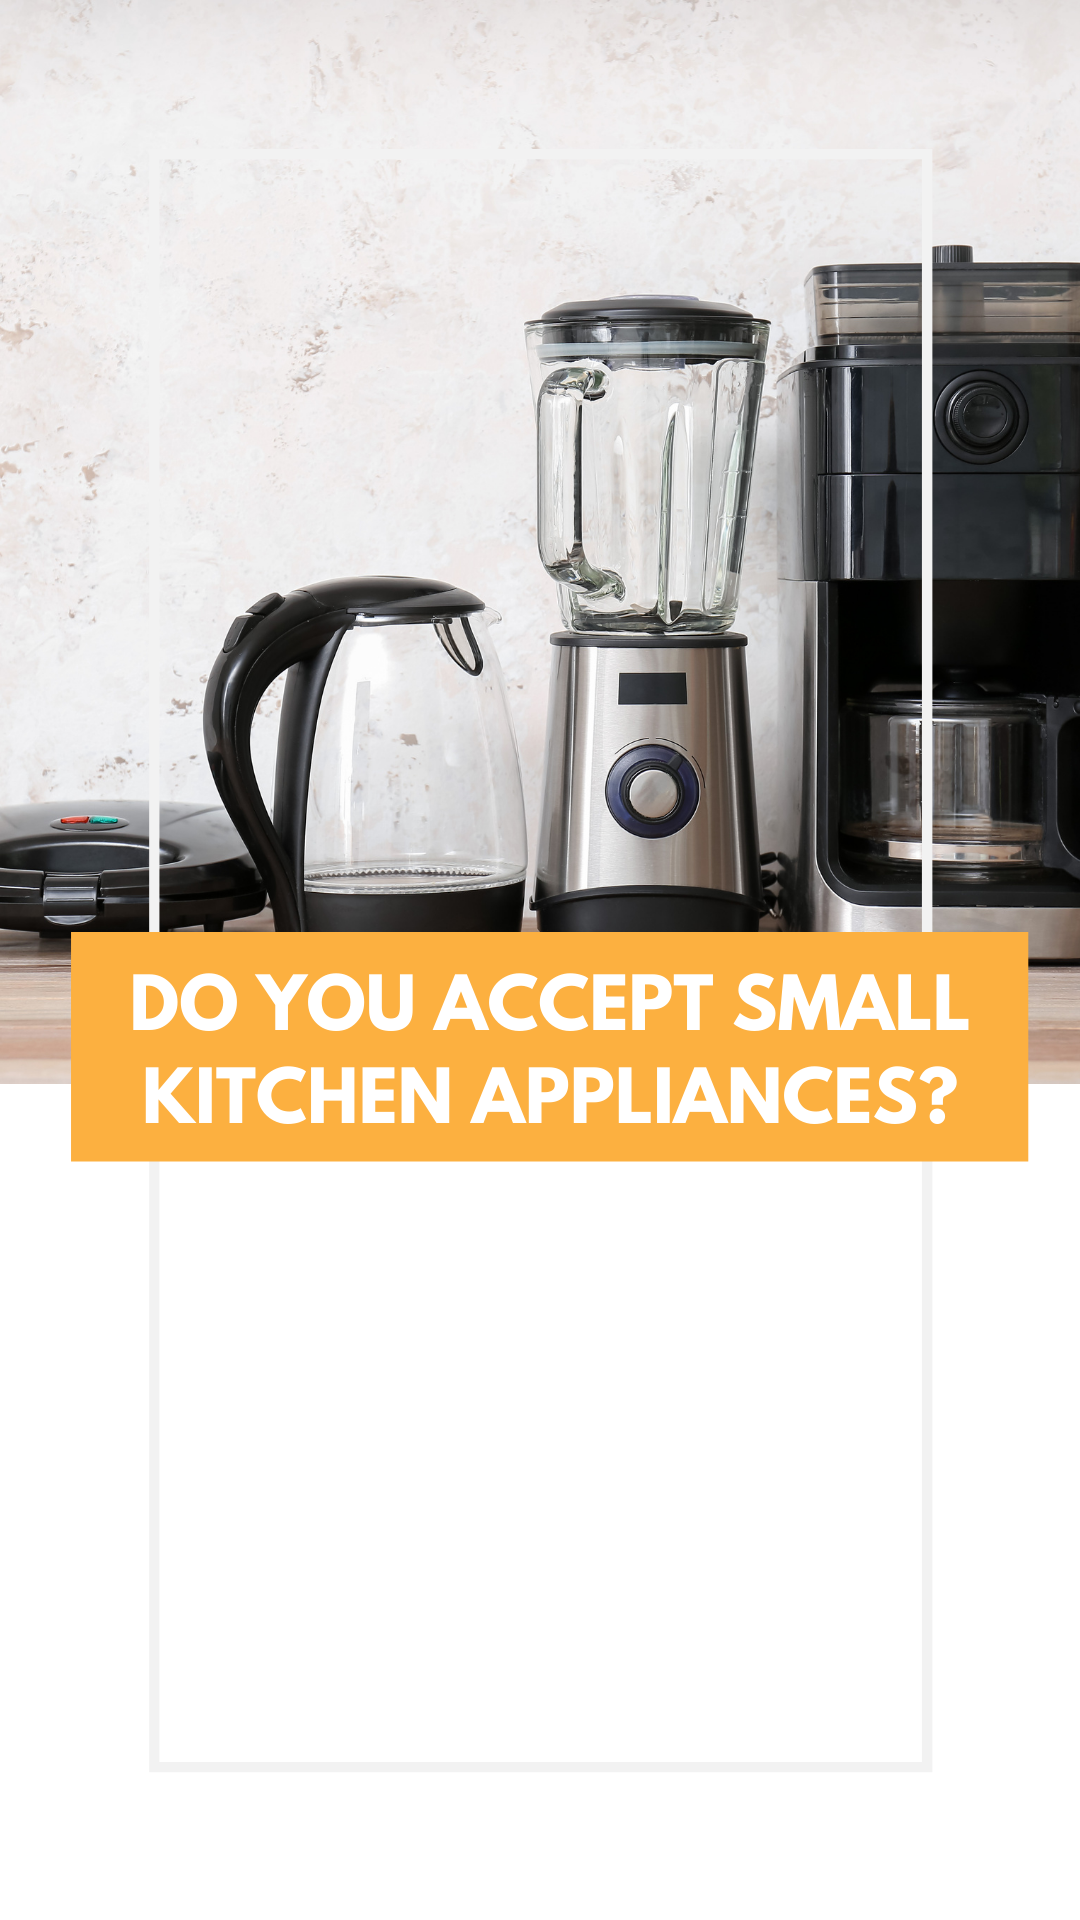 image of small kitchen appliances